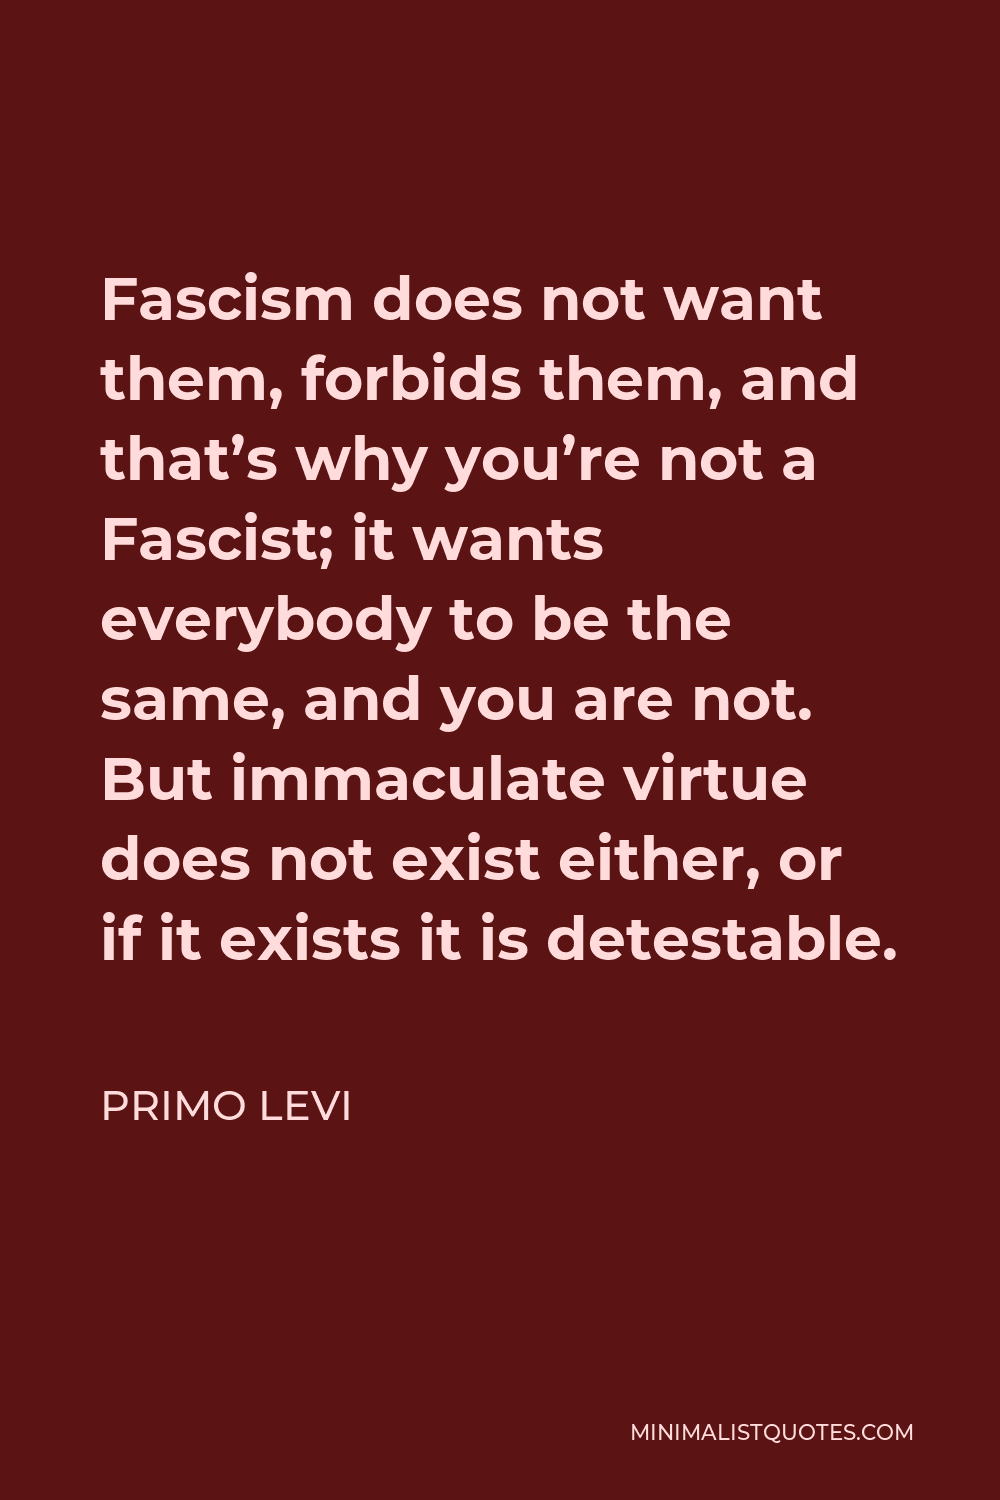 Primo Levi Quote - Fascism does not want them, forbids them, and that’s why you’re not a Fascist; it wants everybody to be the same, and you are not. But immaculate virtue does not exist either, or if it exists it is detestable.